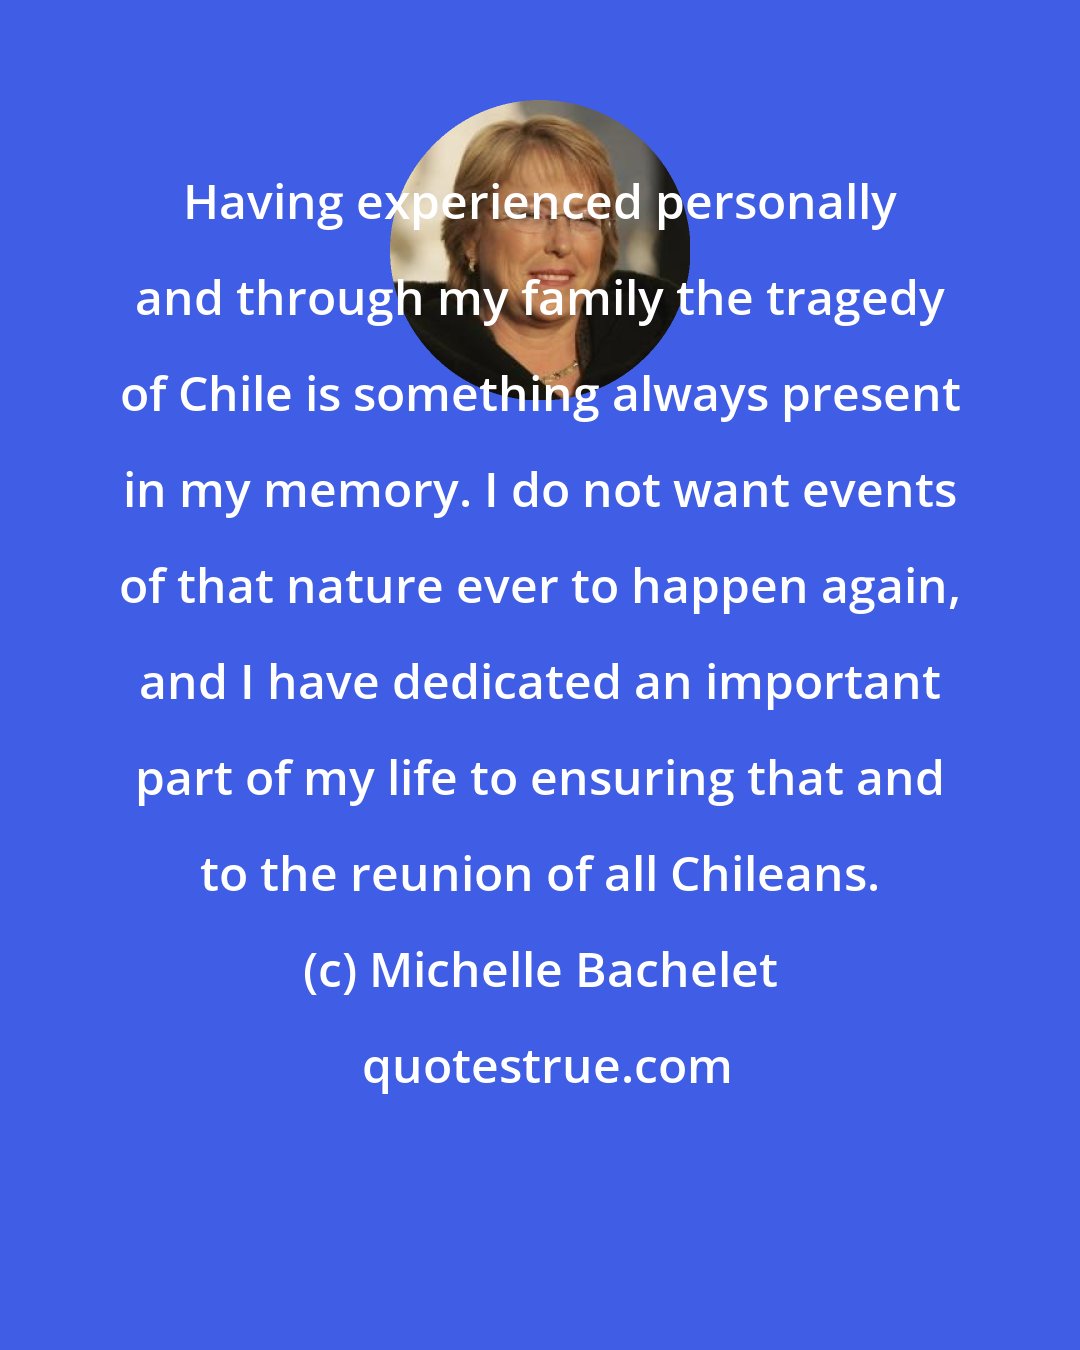 Michelle Bachelet: Having experienced personally and through my family the tragedy of Chile is something always present in my memory. I do not want events of that nature ever to happen again, and I have dedicated an important part of my life to ensuring that and to the reunion of all Chileans.